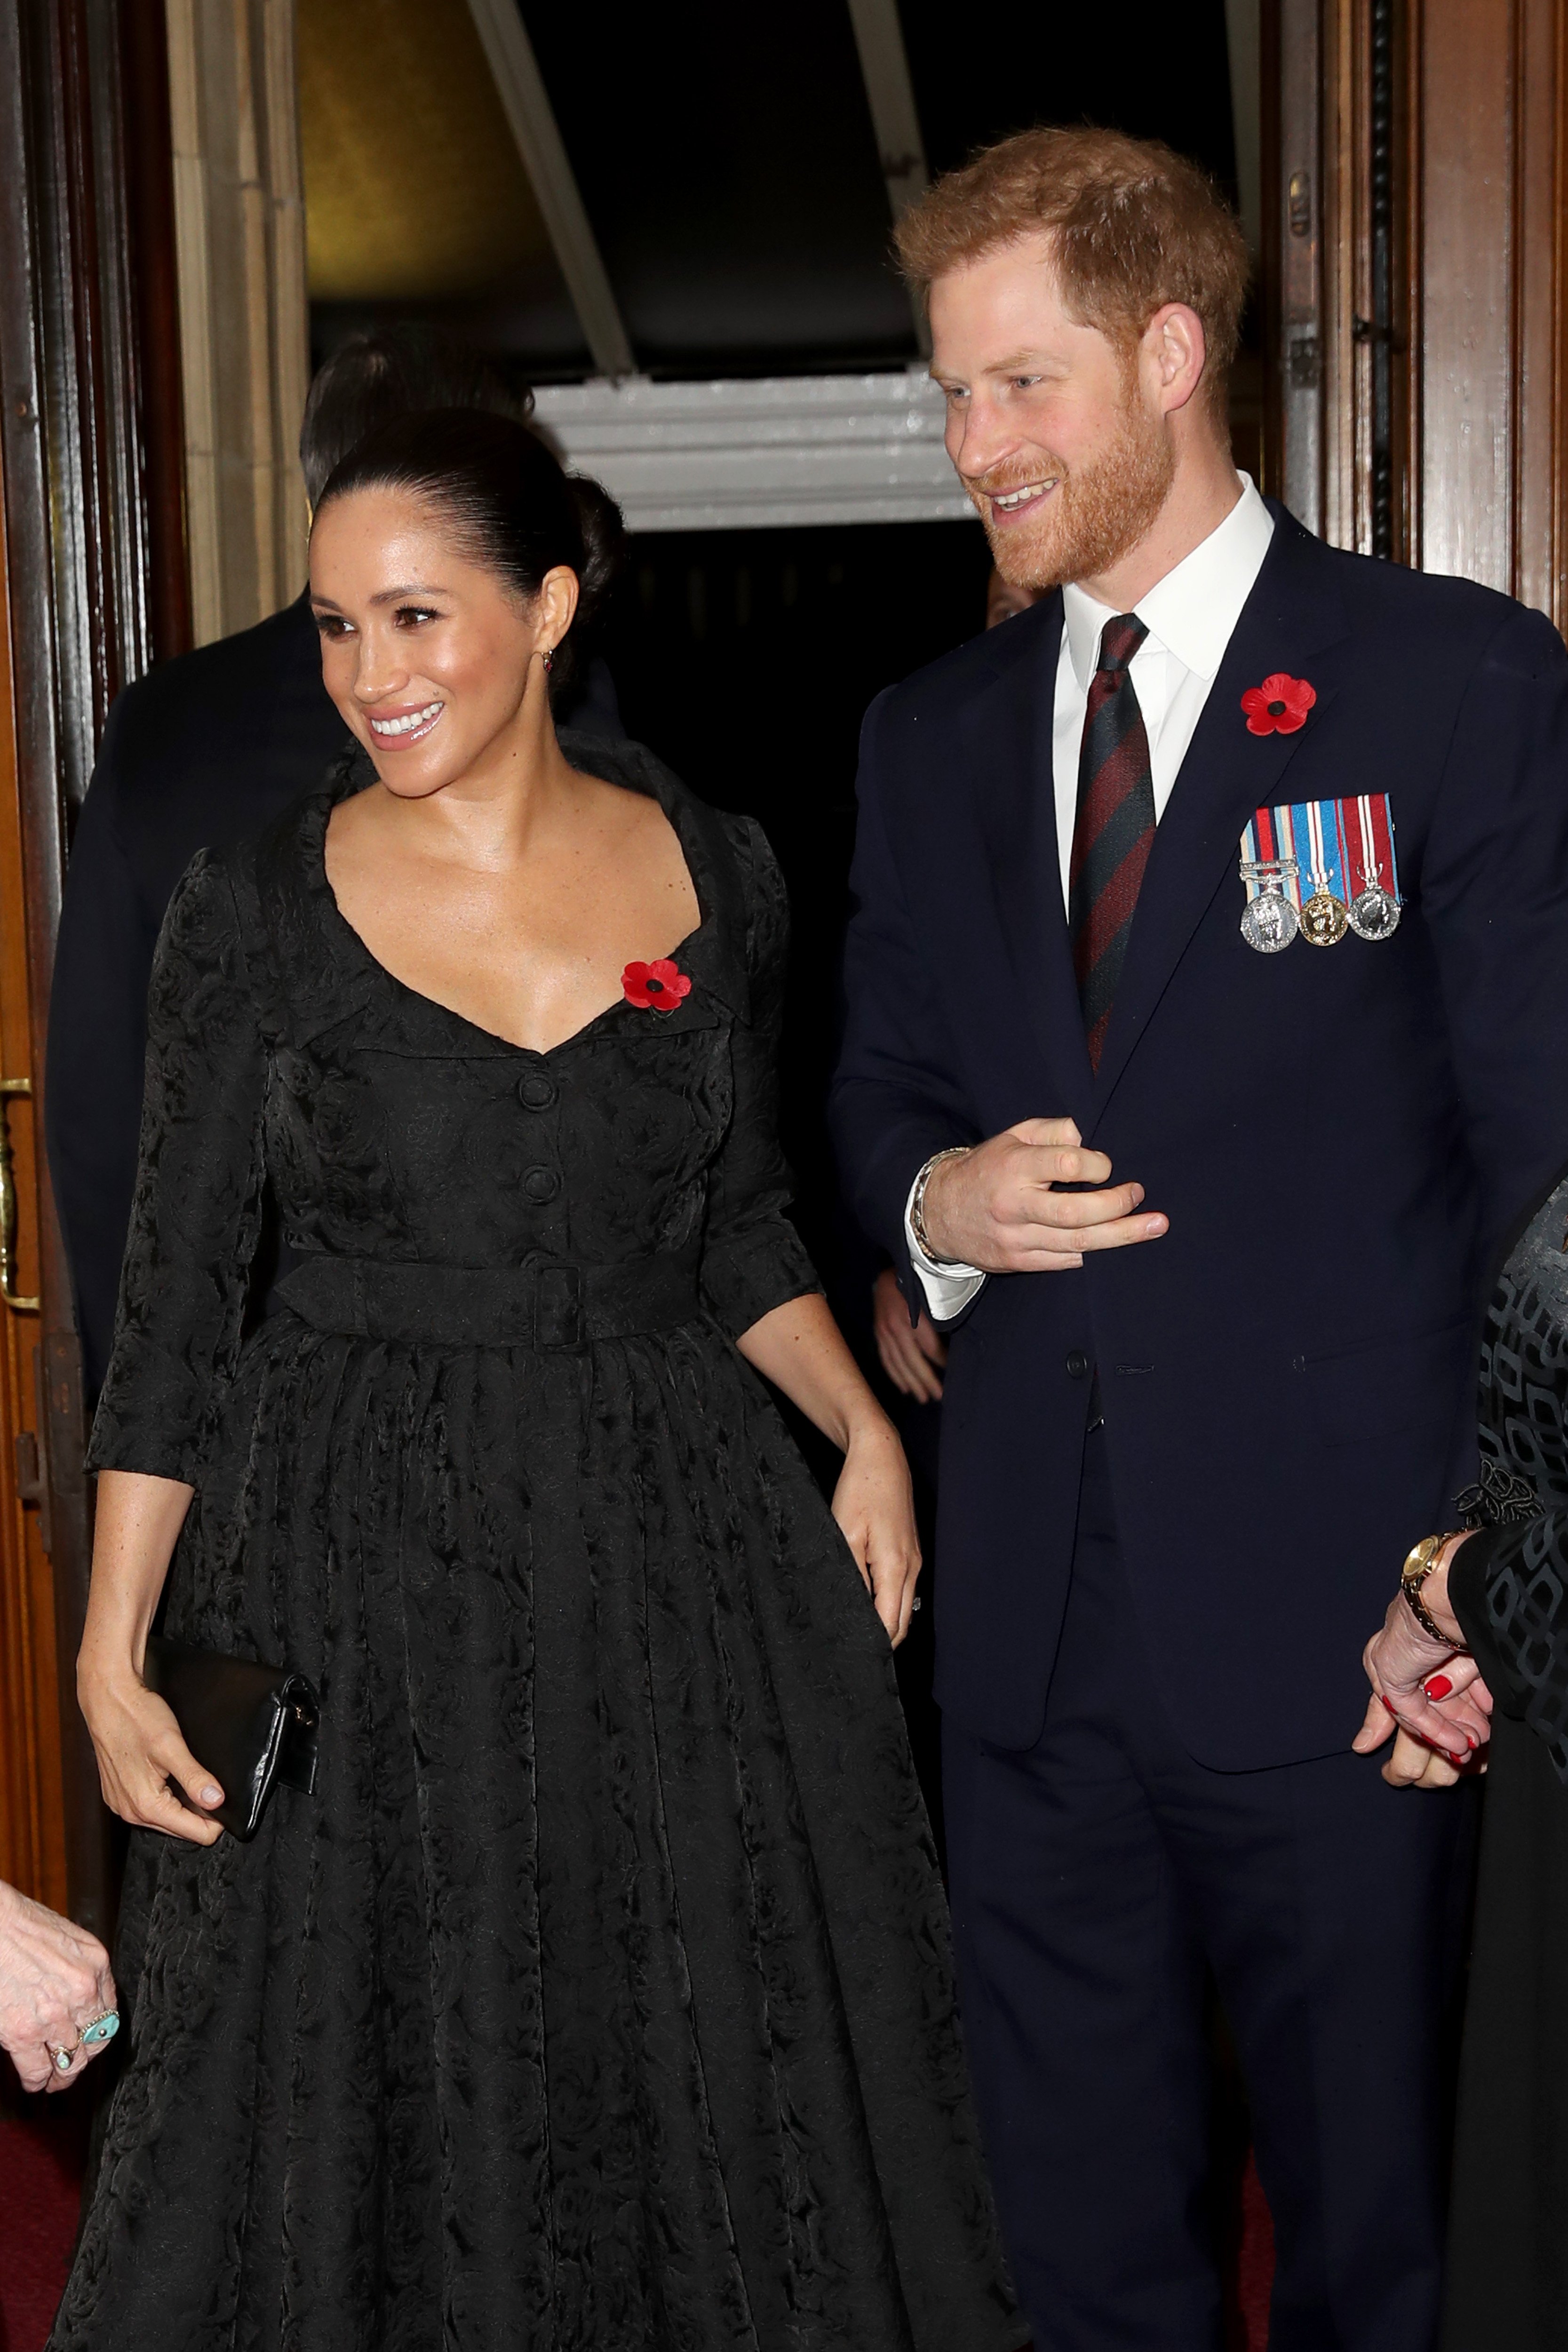 Meghan, Duchess of Sussex and Prince Harry, Duke of Sussex attend the annual Royal British Legion Festival of Remembrance at the Royal Albert Hall on November 09, 2019, in London, England. | Source: Getty Images.